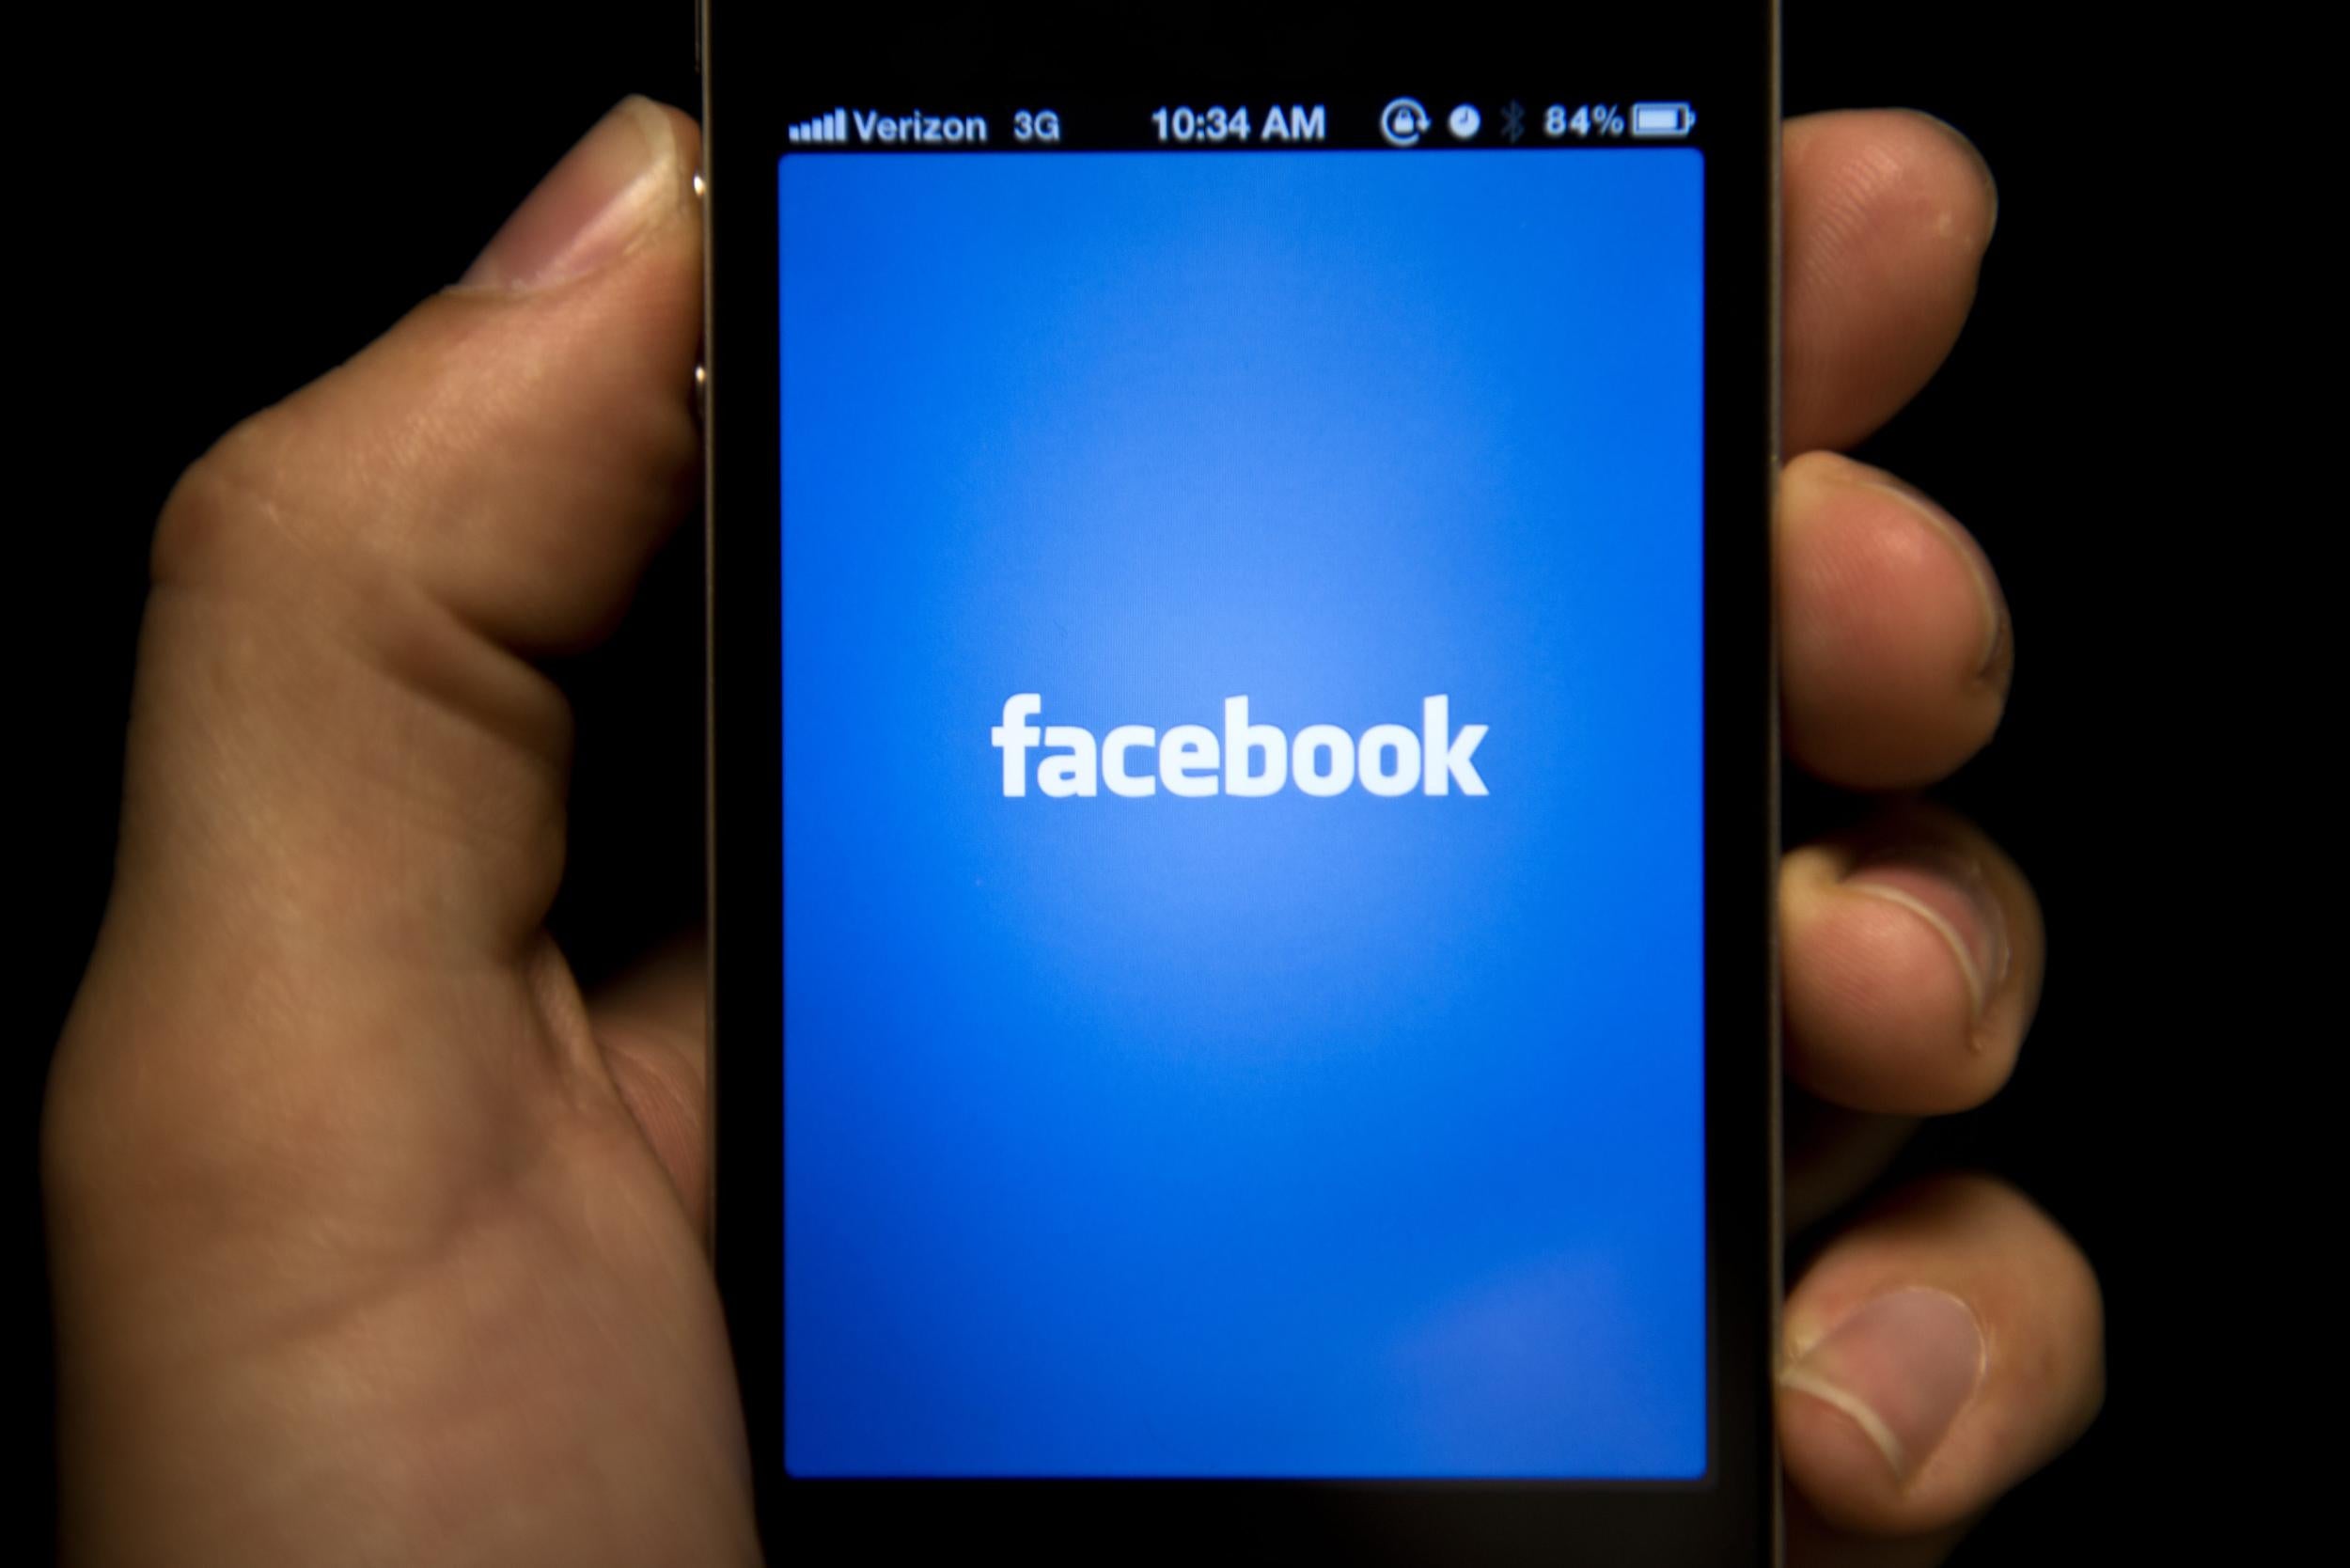 The new iPhone battery meter shows just how much battery the Facebook app uses up